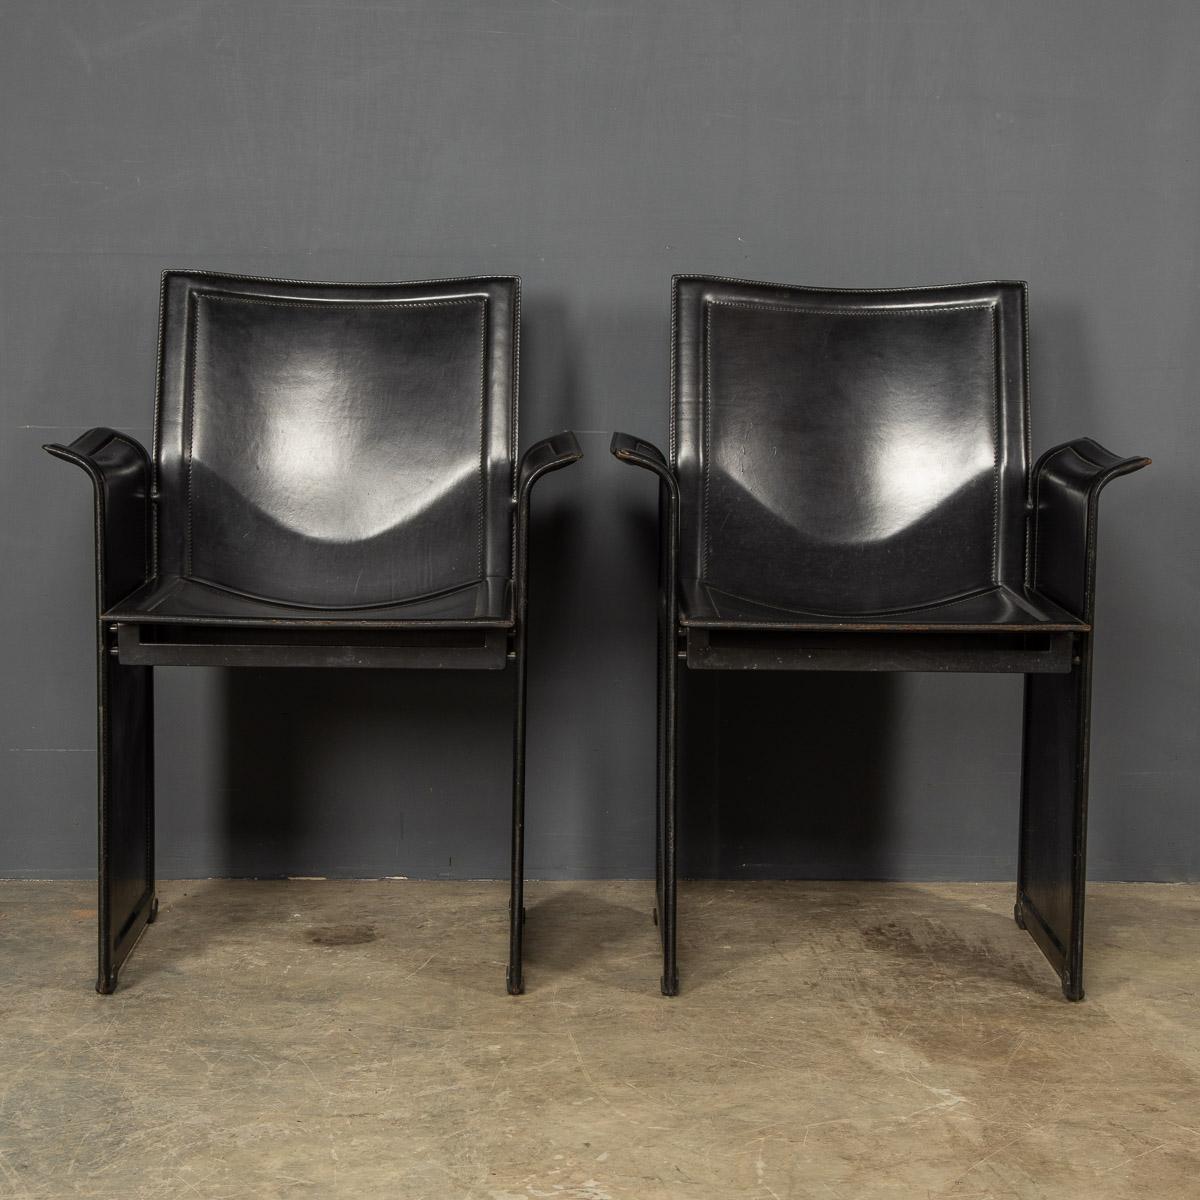 A pair of late 1970's Italian leather chairs. This sleek design is by Tito Agnoli and was manufactured by Matteo Grassi, named the Korium an adaption of the Latin for a skin layer.

Condition
In Good Condition - some wear consistent with normal